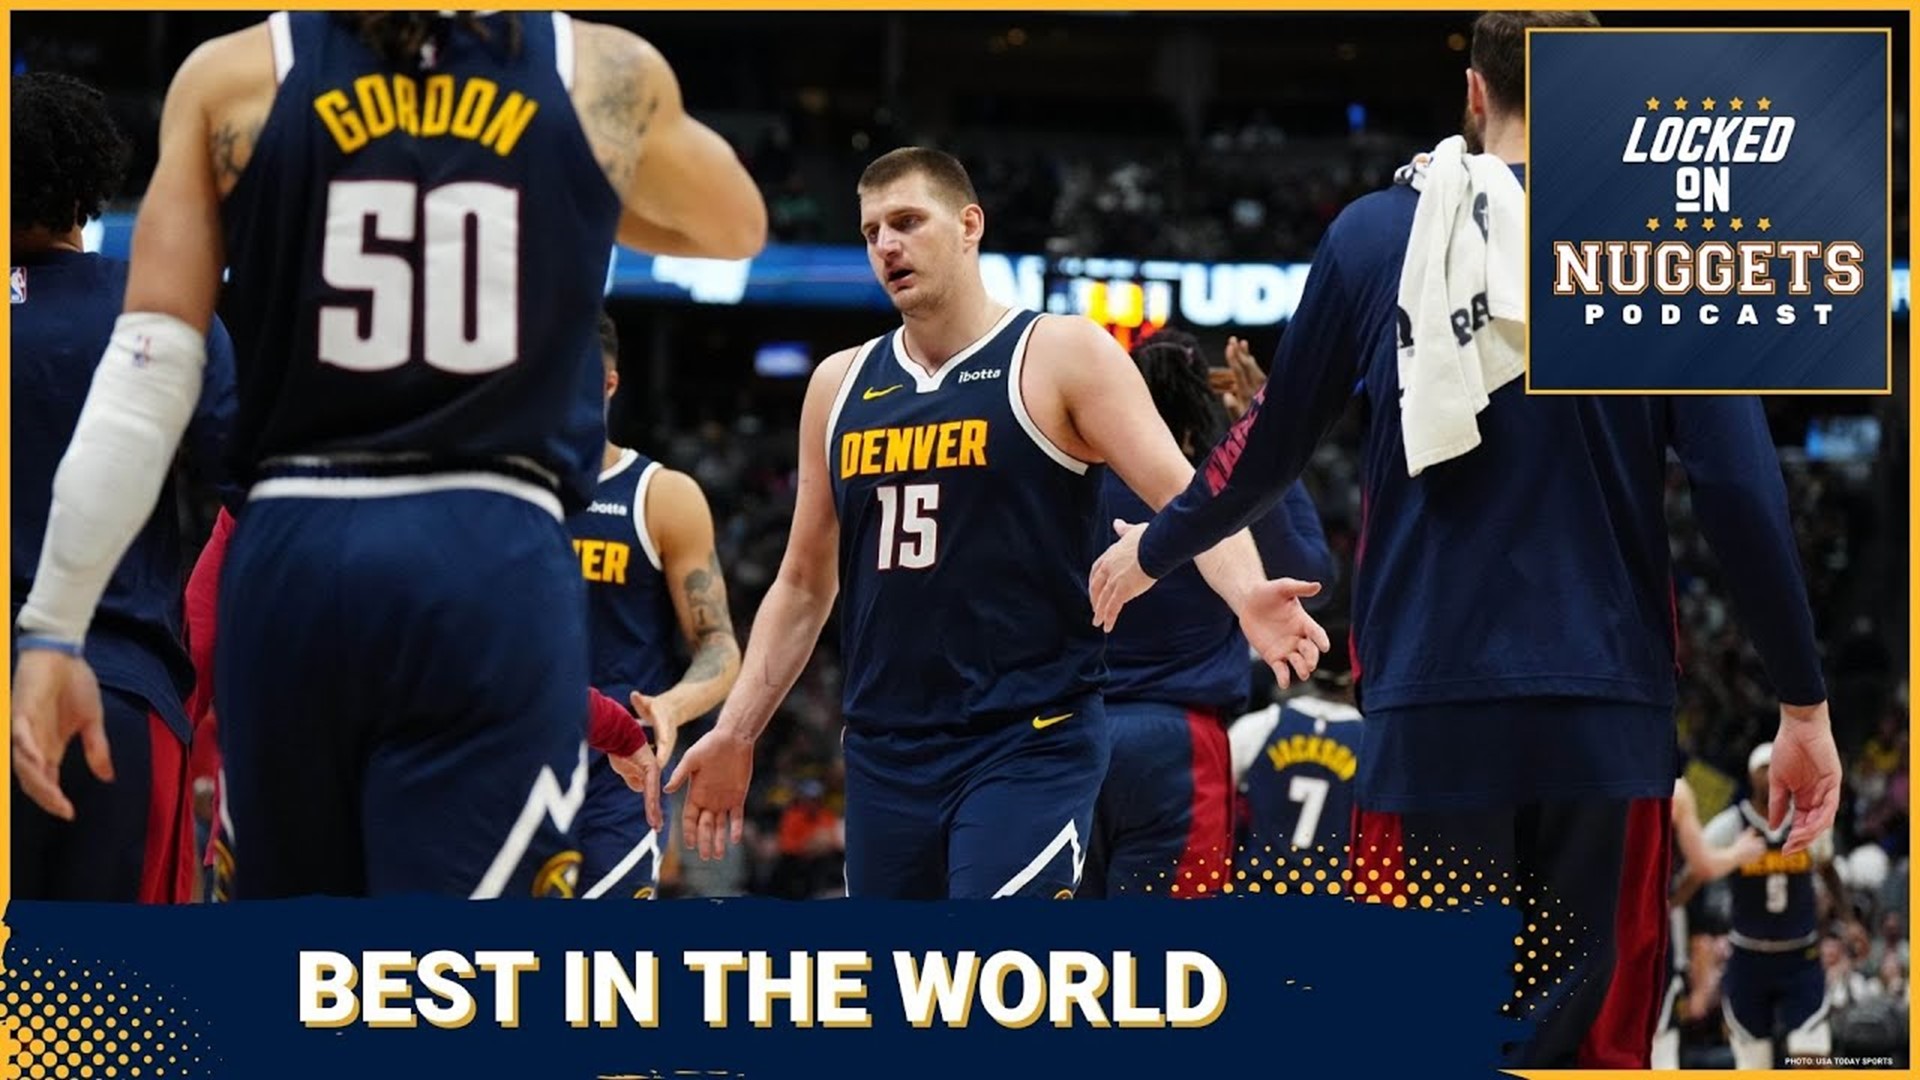 The Nuggets bounce back behind a phenomenal game from Nikola Jokic. World's Finest breaks it down as Matt Moore describes why stats never do Nikola Jokic justice